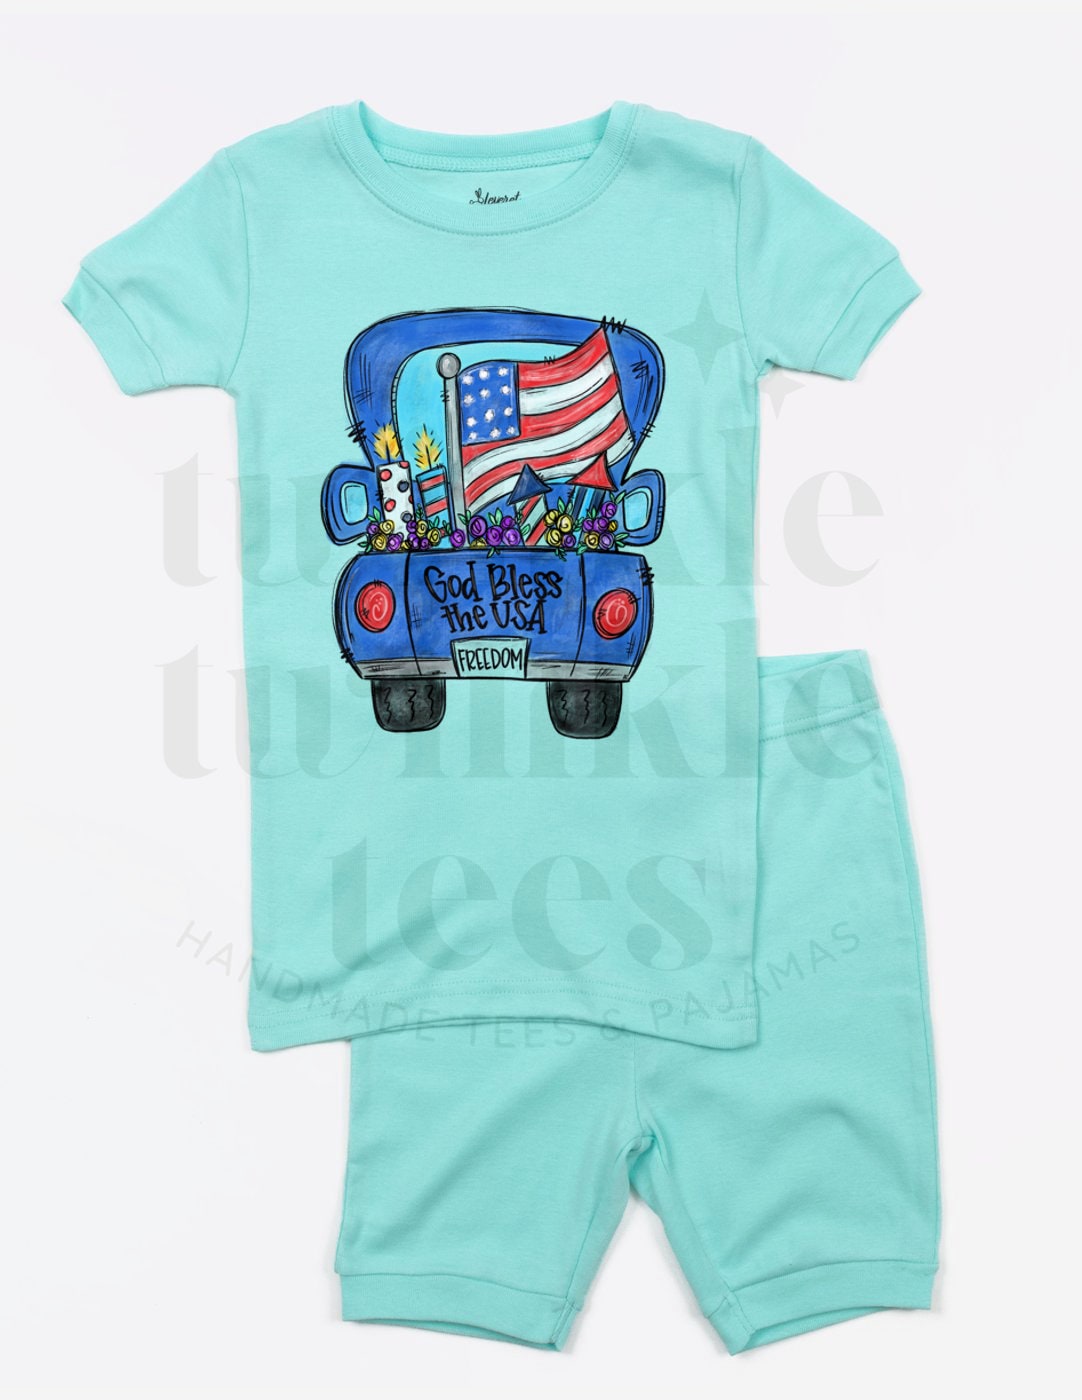 Patriotic Truck Aqua Solid Shorts Set for Kids - Kids 4th of July Set - 4th of July Toddler Shirt and Shorts